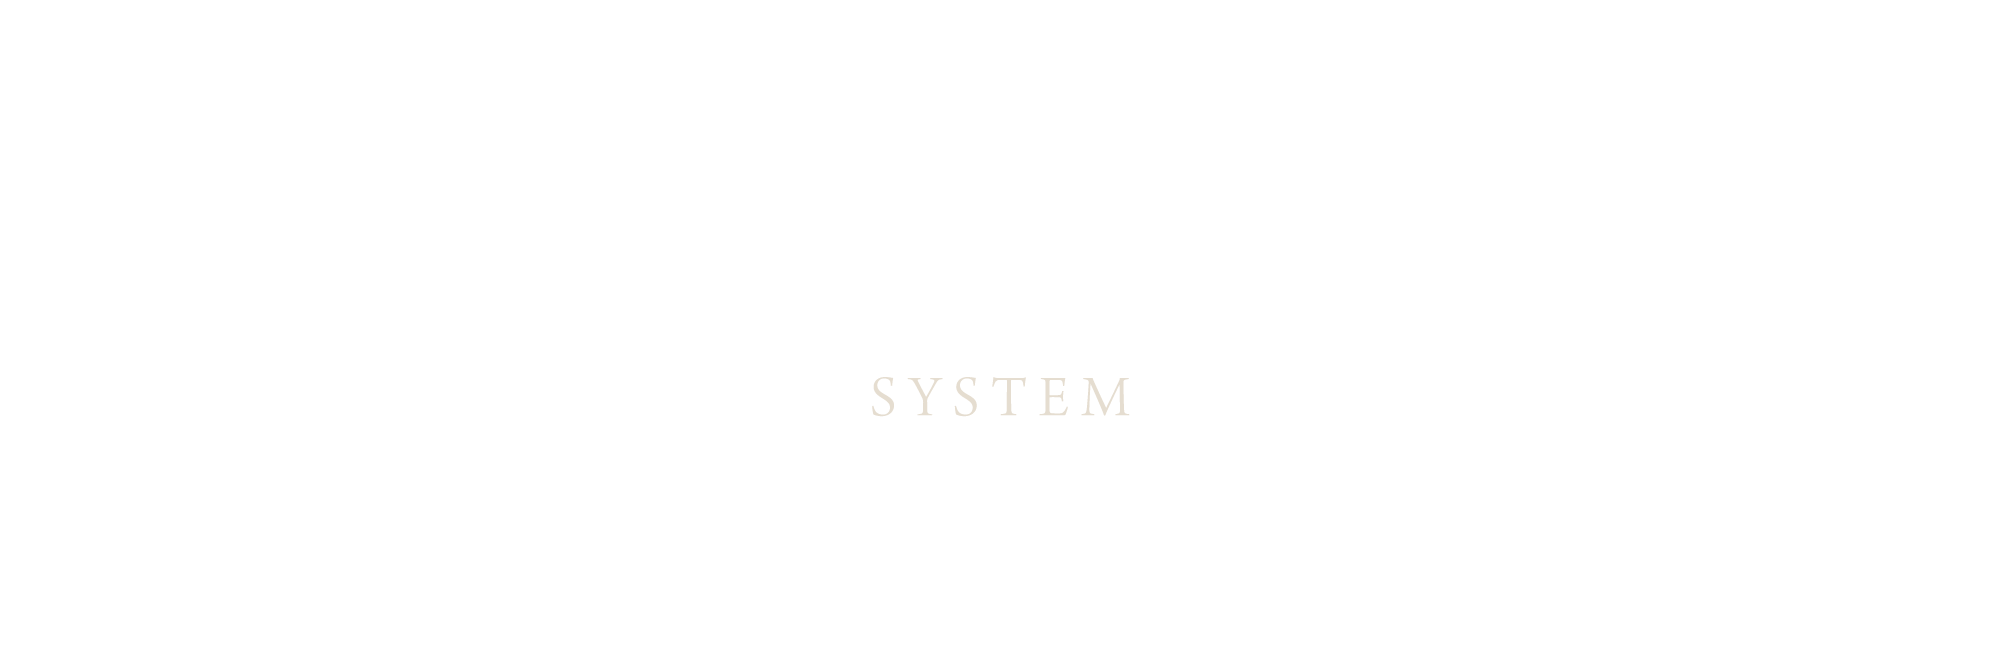 Time’s SYSTEM